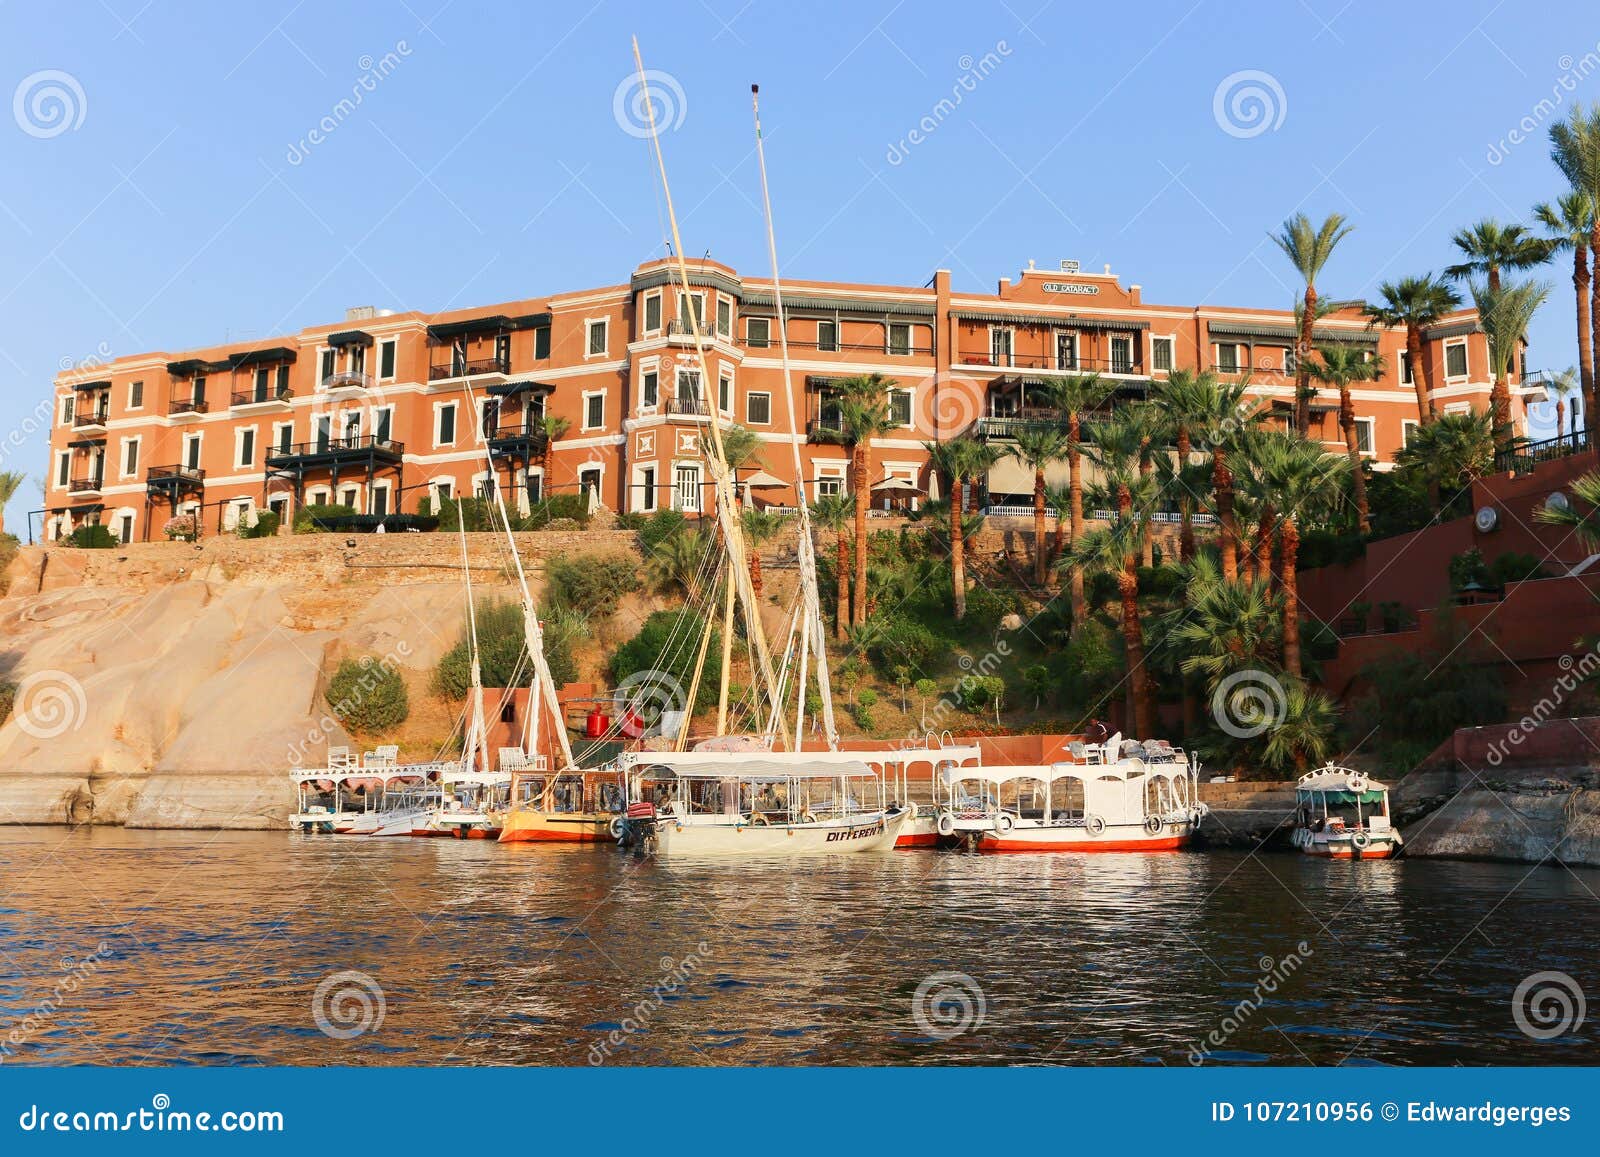 Grand Hotel Aswan Egypt Editorial Photo Image Of Peaceful 107210956